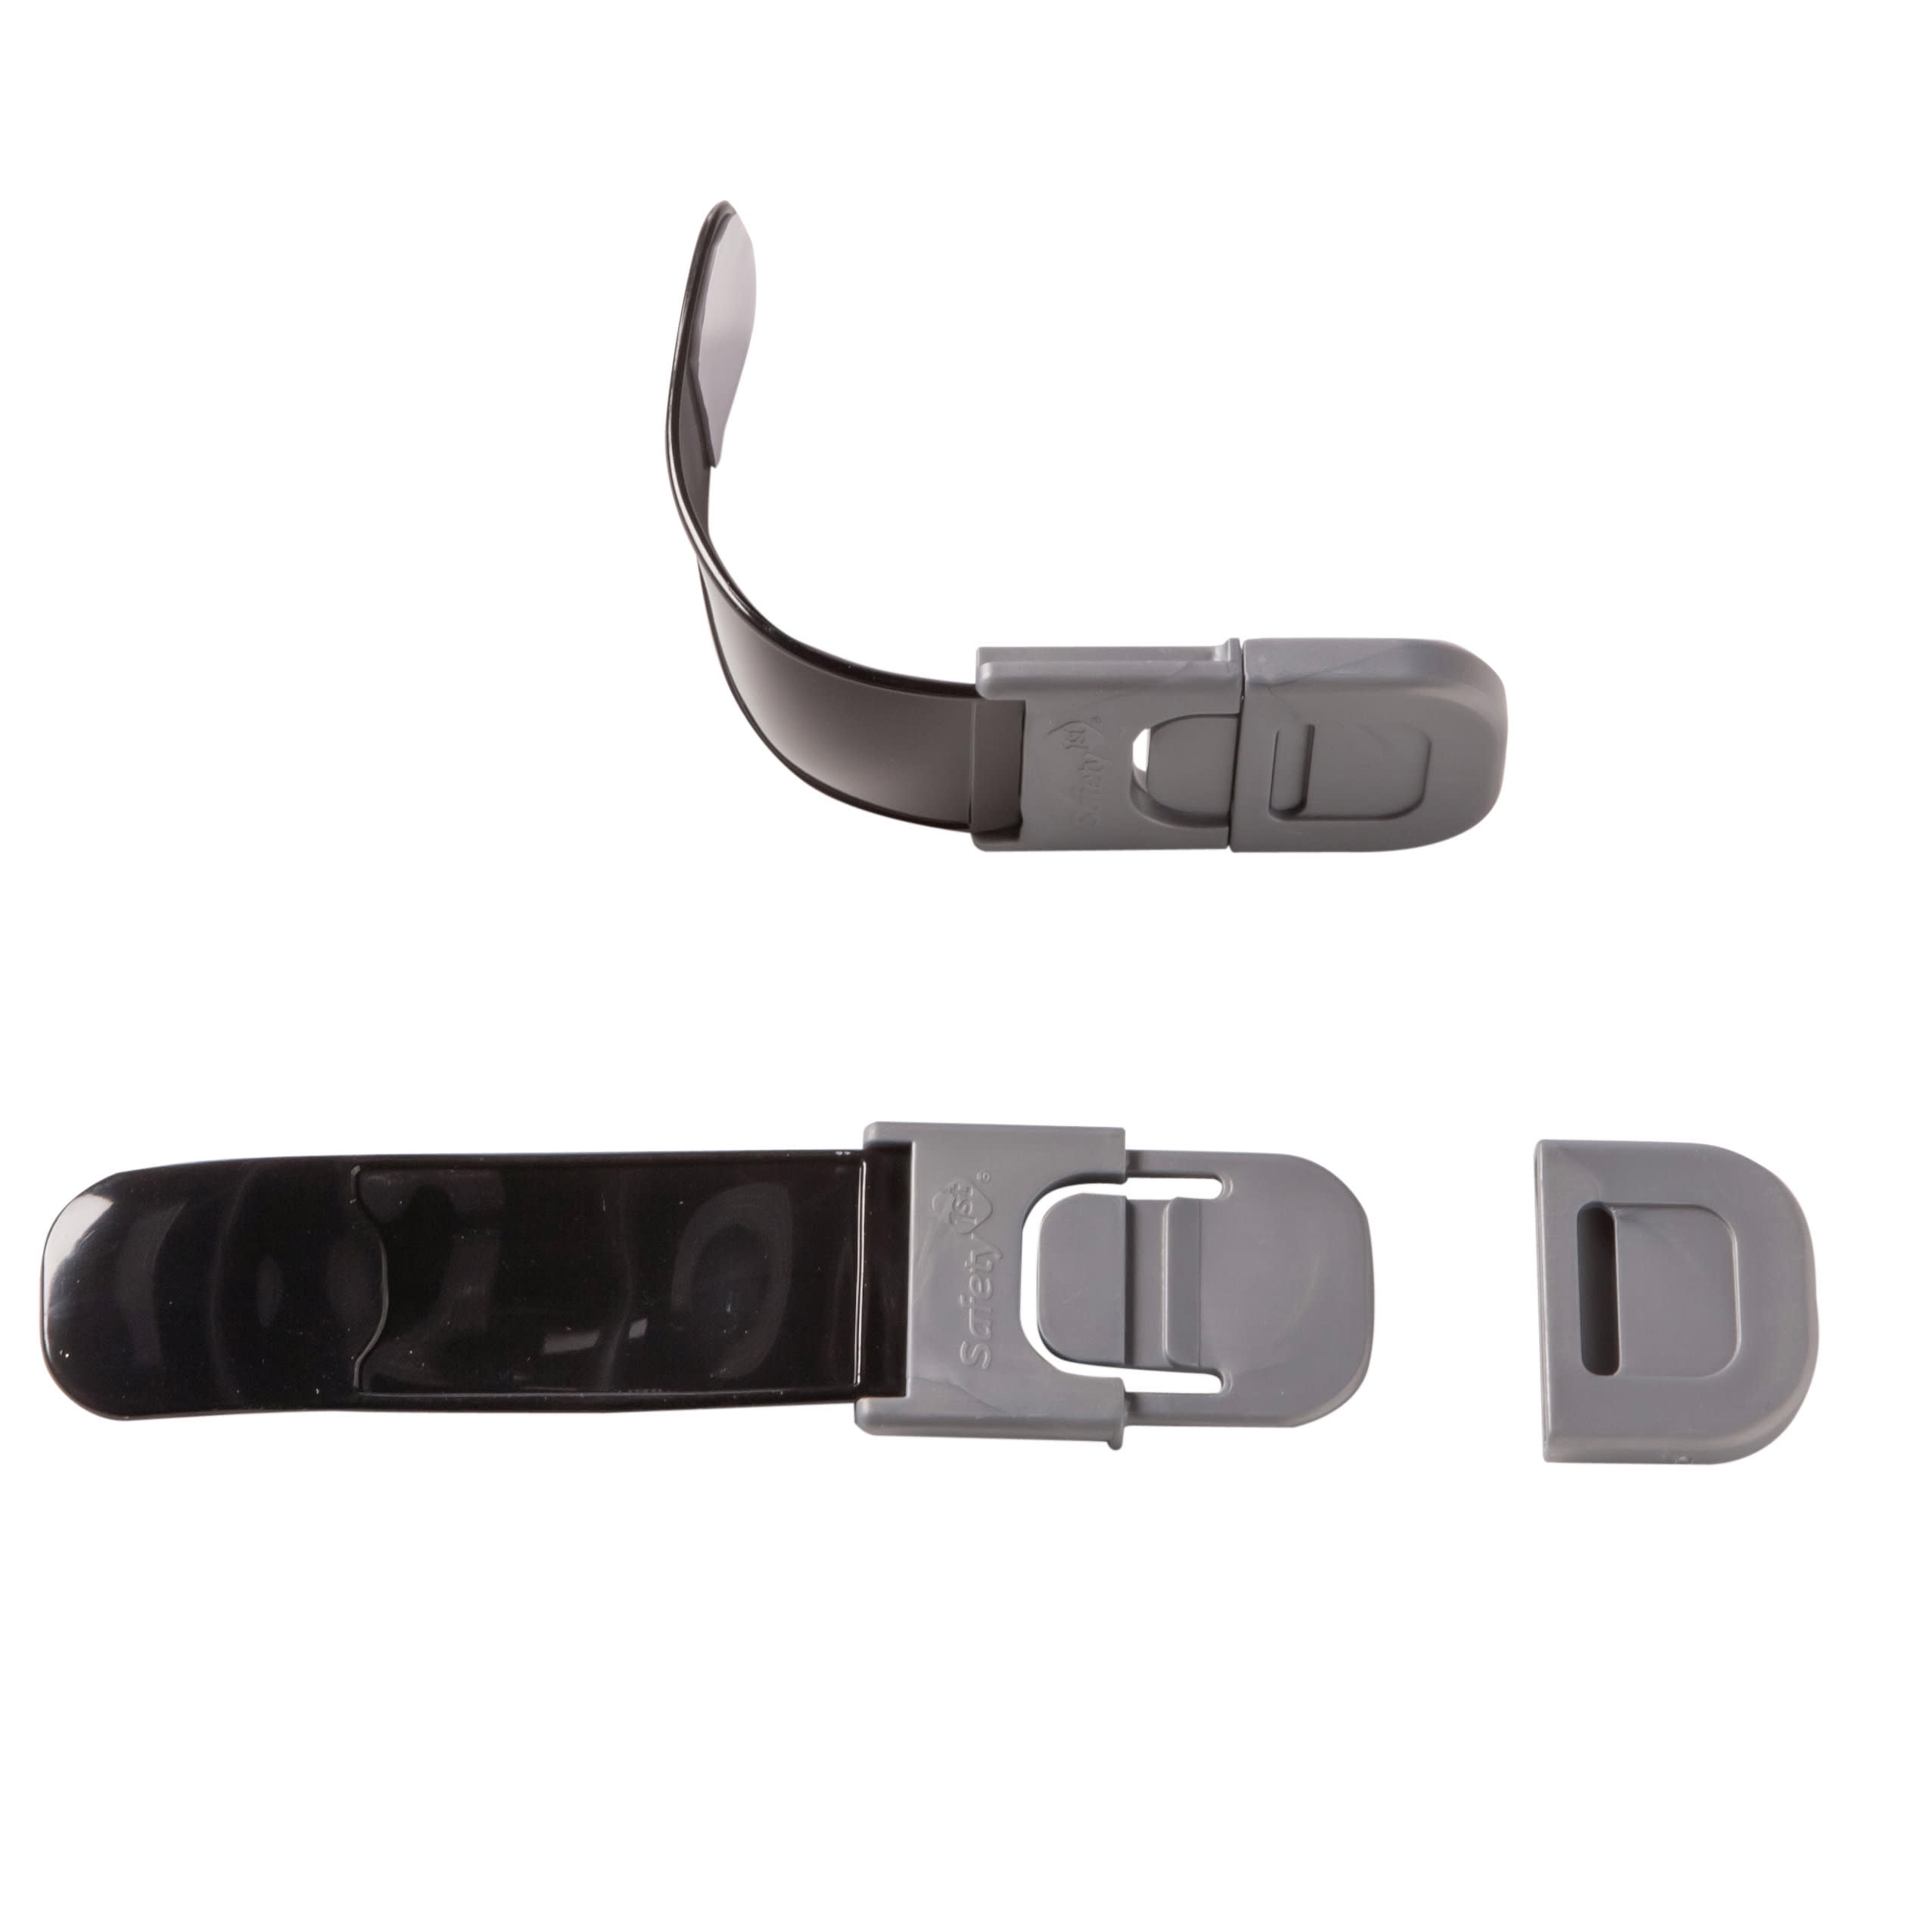 Black/Stainless Refrigerator Lock (for two-tone appliances)